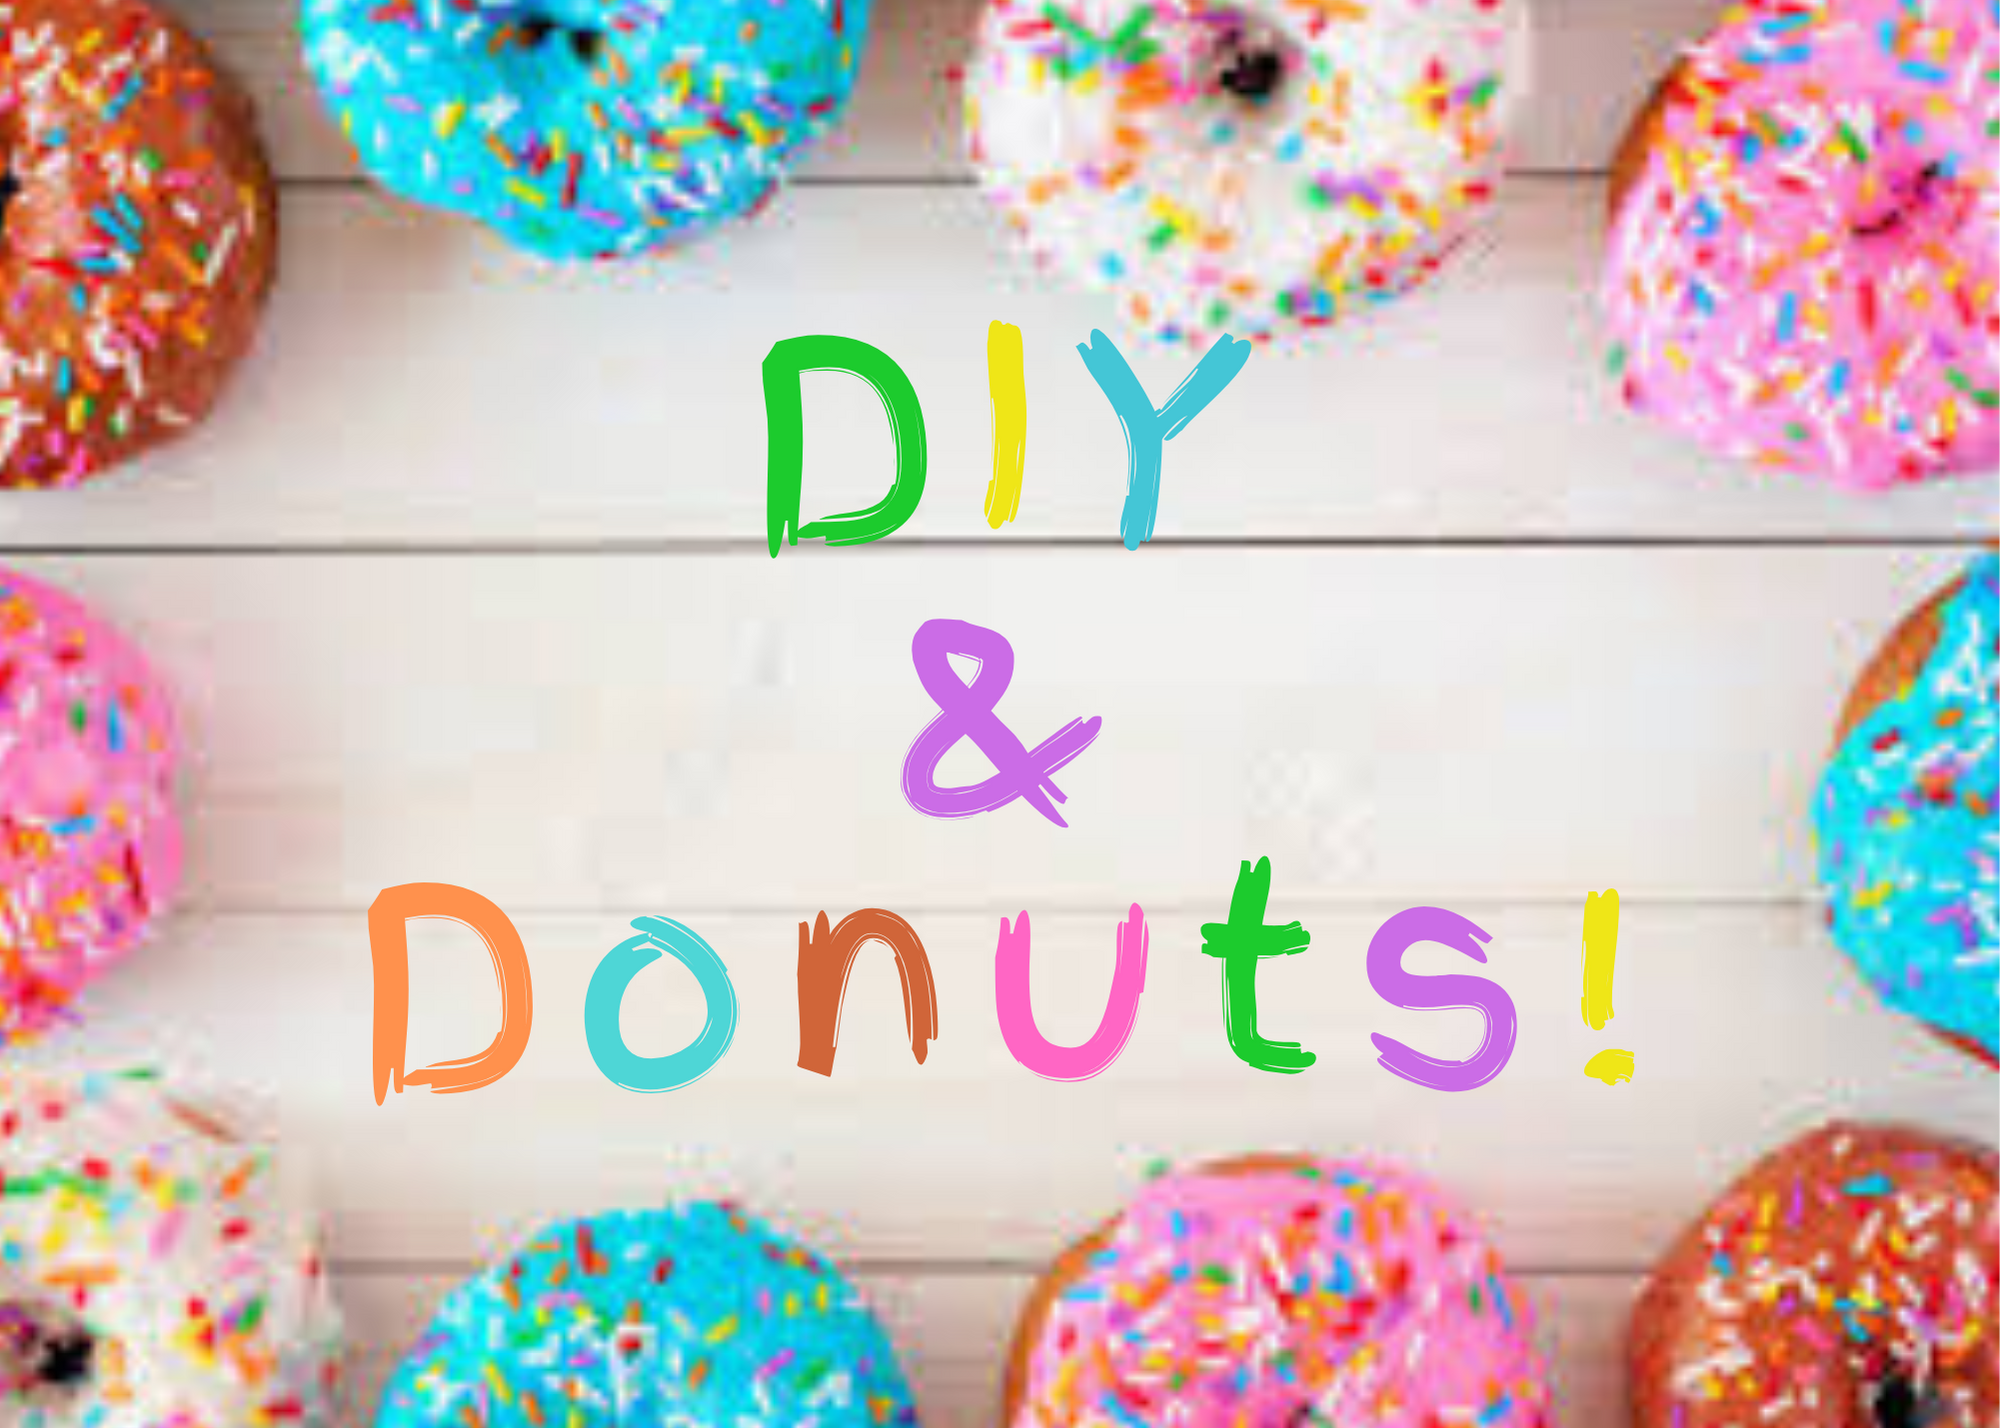 DIY and Donuts written in multiple colors surrounded by a border to donuts with sprinkles